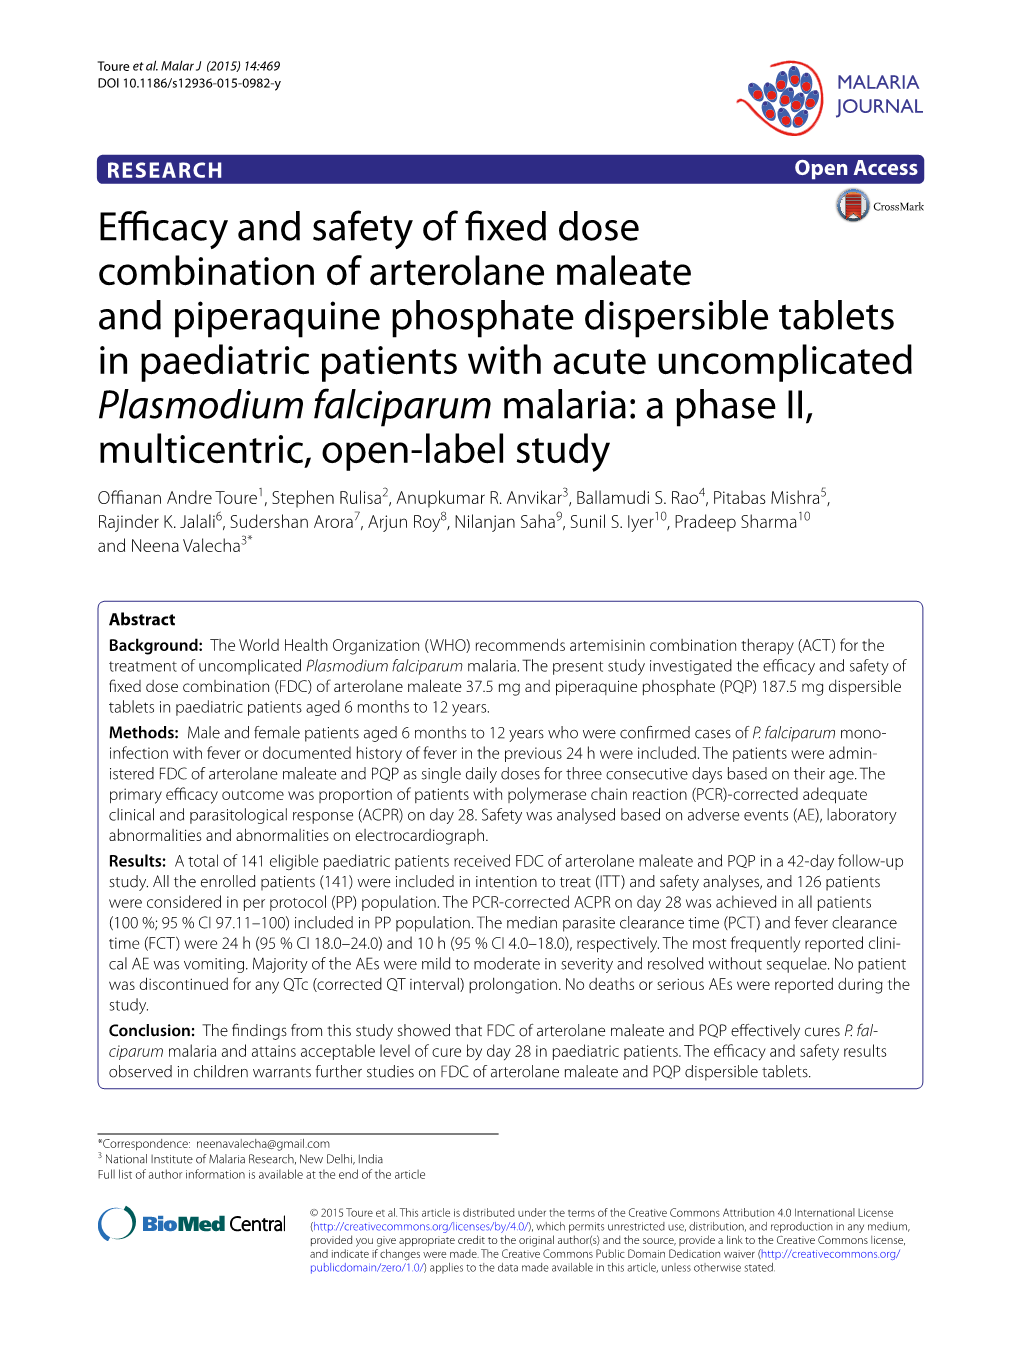 Efficacy and Safety of Fixed Dose Combination of Arterolane Maleate